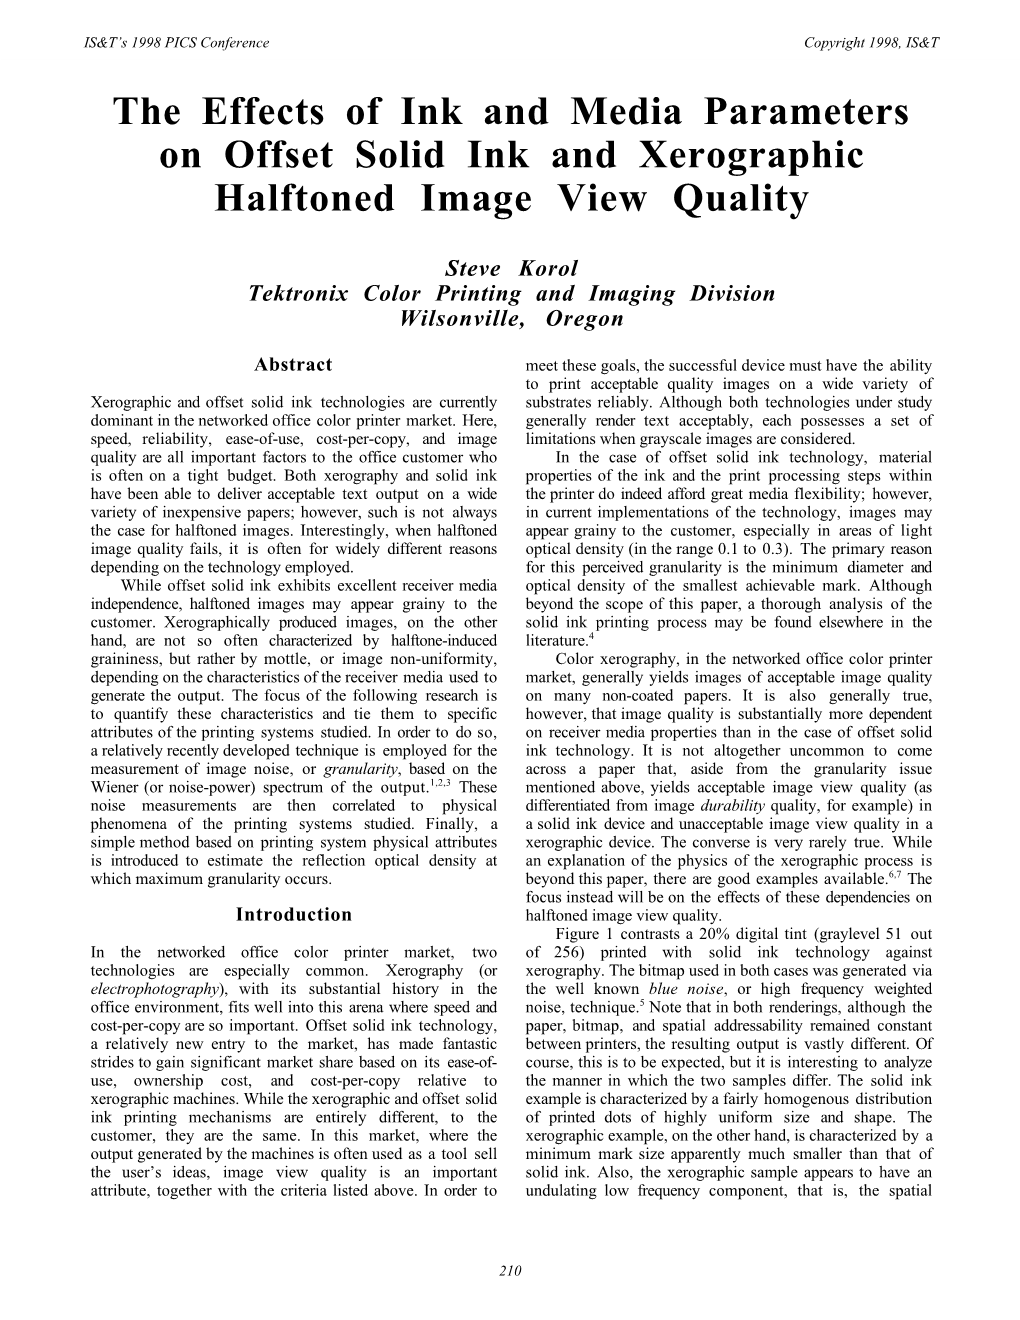 The Effects of Ink and Media Parameters on Offset Solid Ink and Xerographic Halftoned Image View Quality